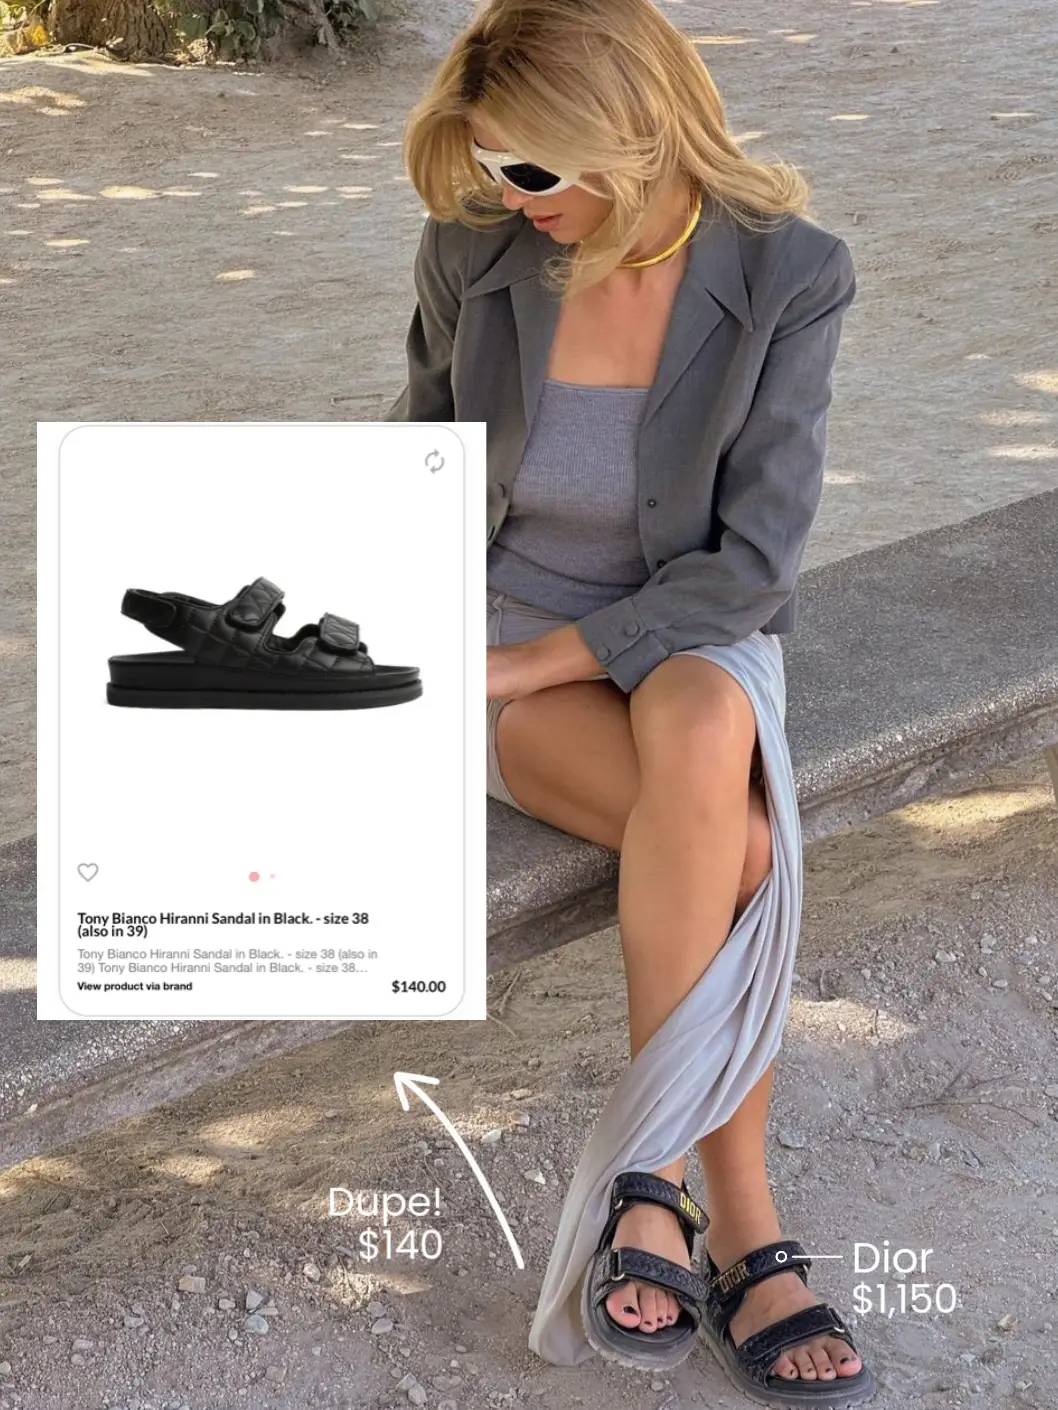 Celebrity Sandal Dupes, Gallery posted by Mada